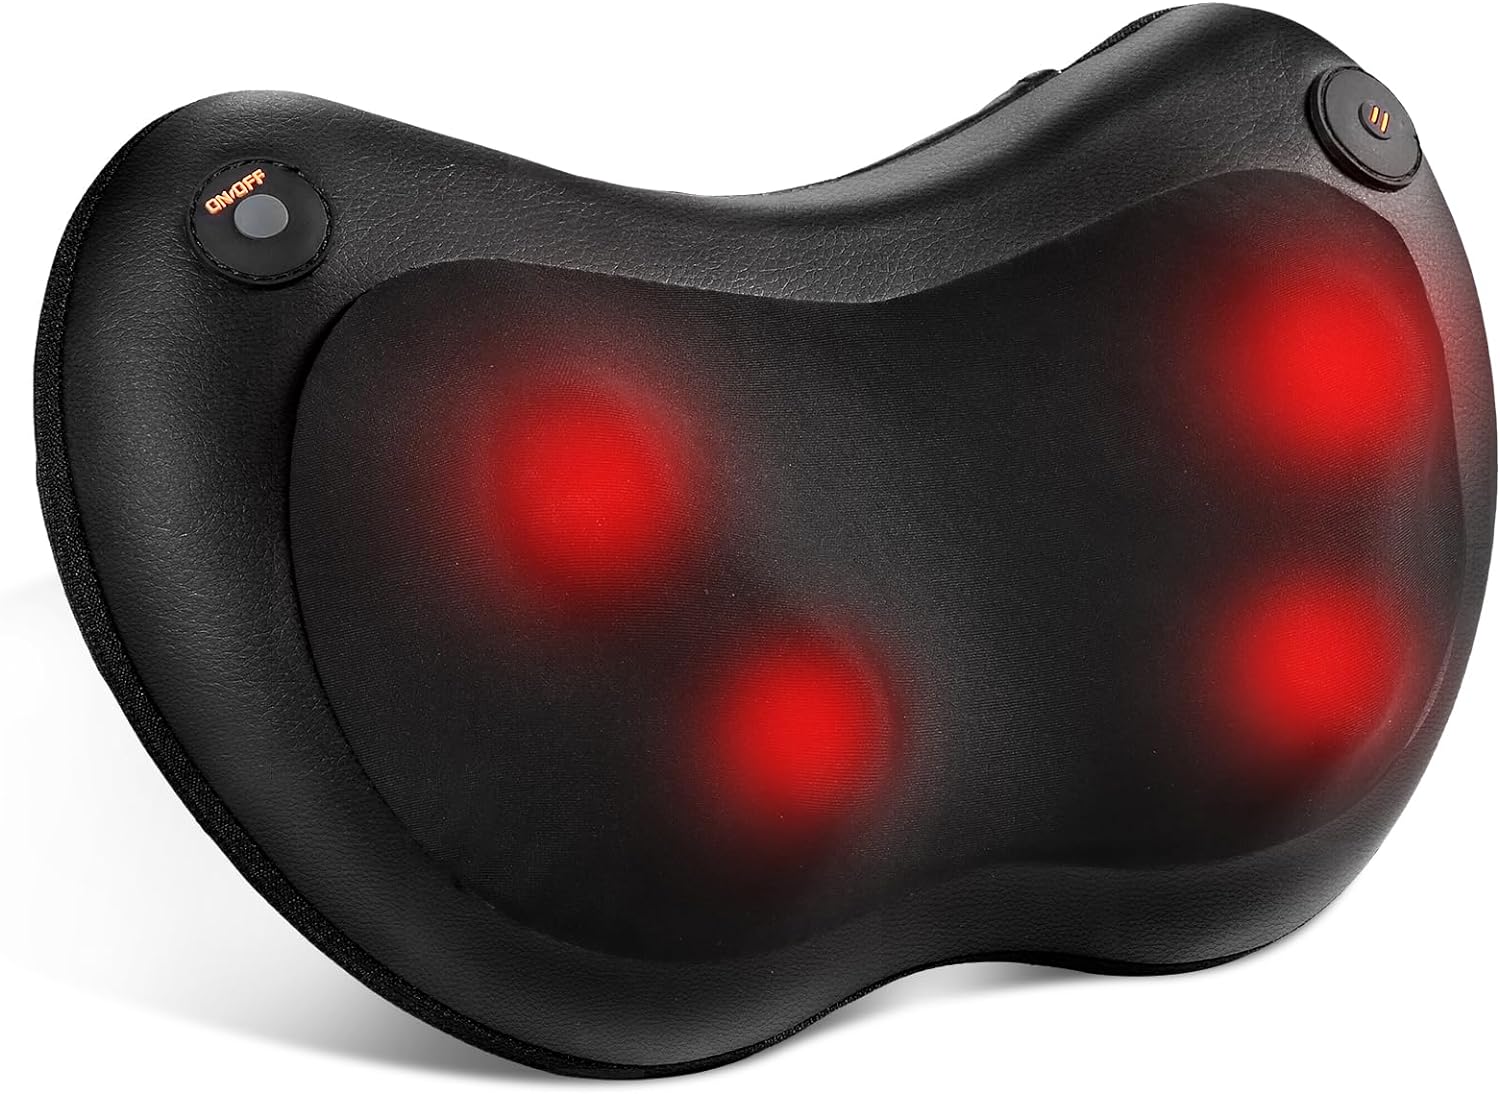 Naipo Shiatsu Neck Back Massager with Heat, Electric Massager Deep Tissue Kneading Massage to Relief Shoulder Muscles, Gift for Mom/Dad/Women/Men in Home Office and Car - image 1 of 12